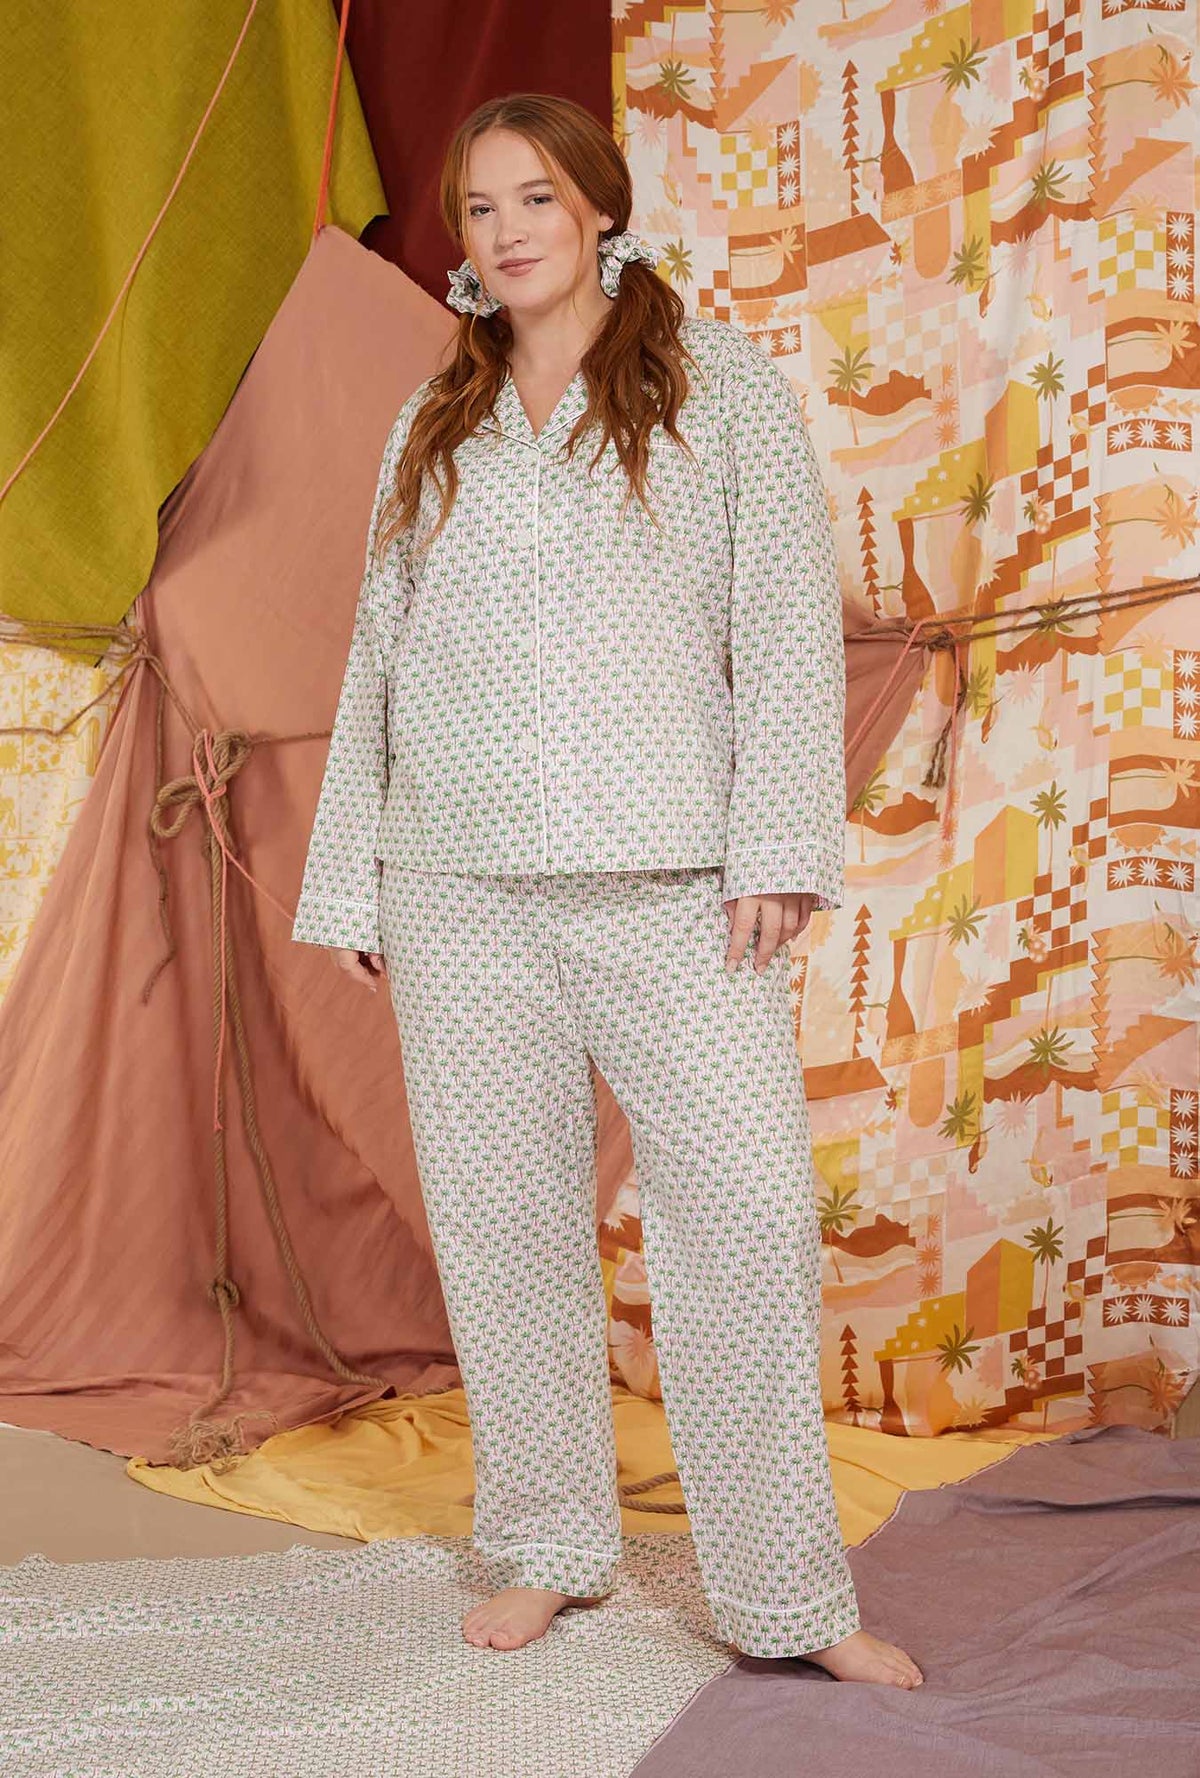 A lady wearing multicolor long sleeve clasic woven cotton poplin plus size pj set with palm geo print.